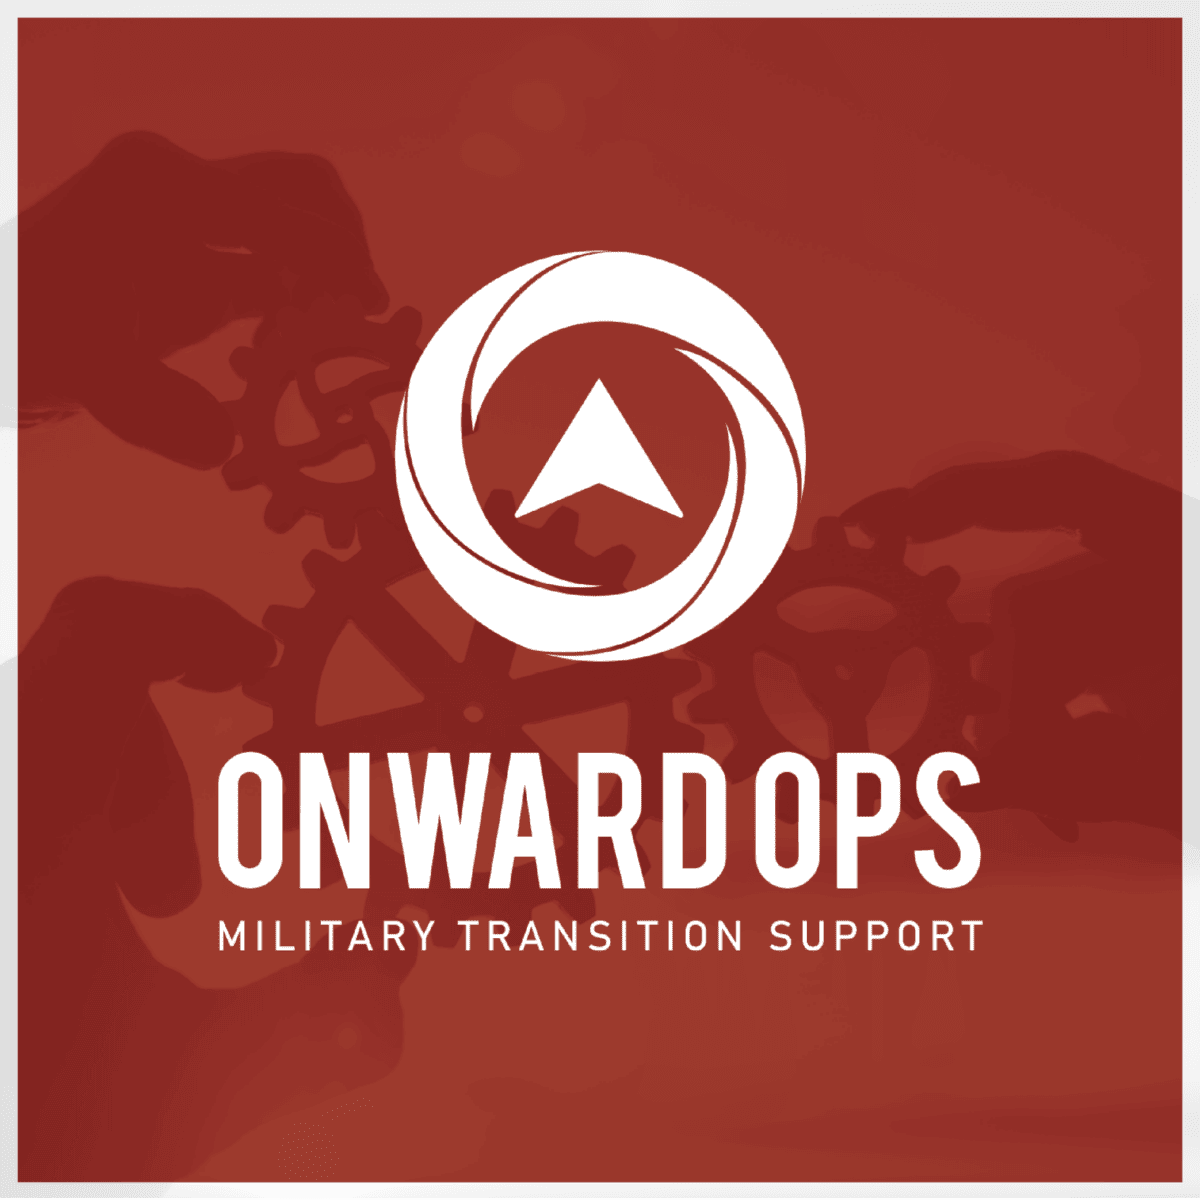 Onward Ops Military Transition Support